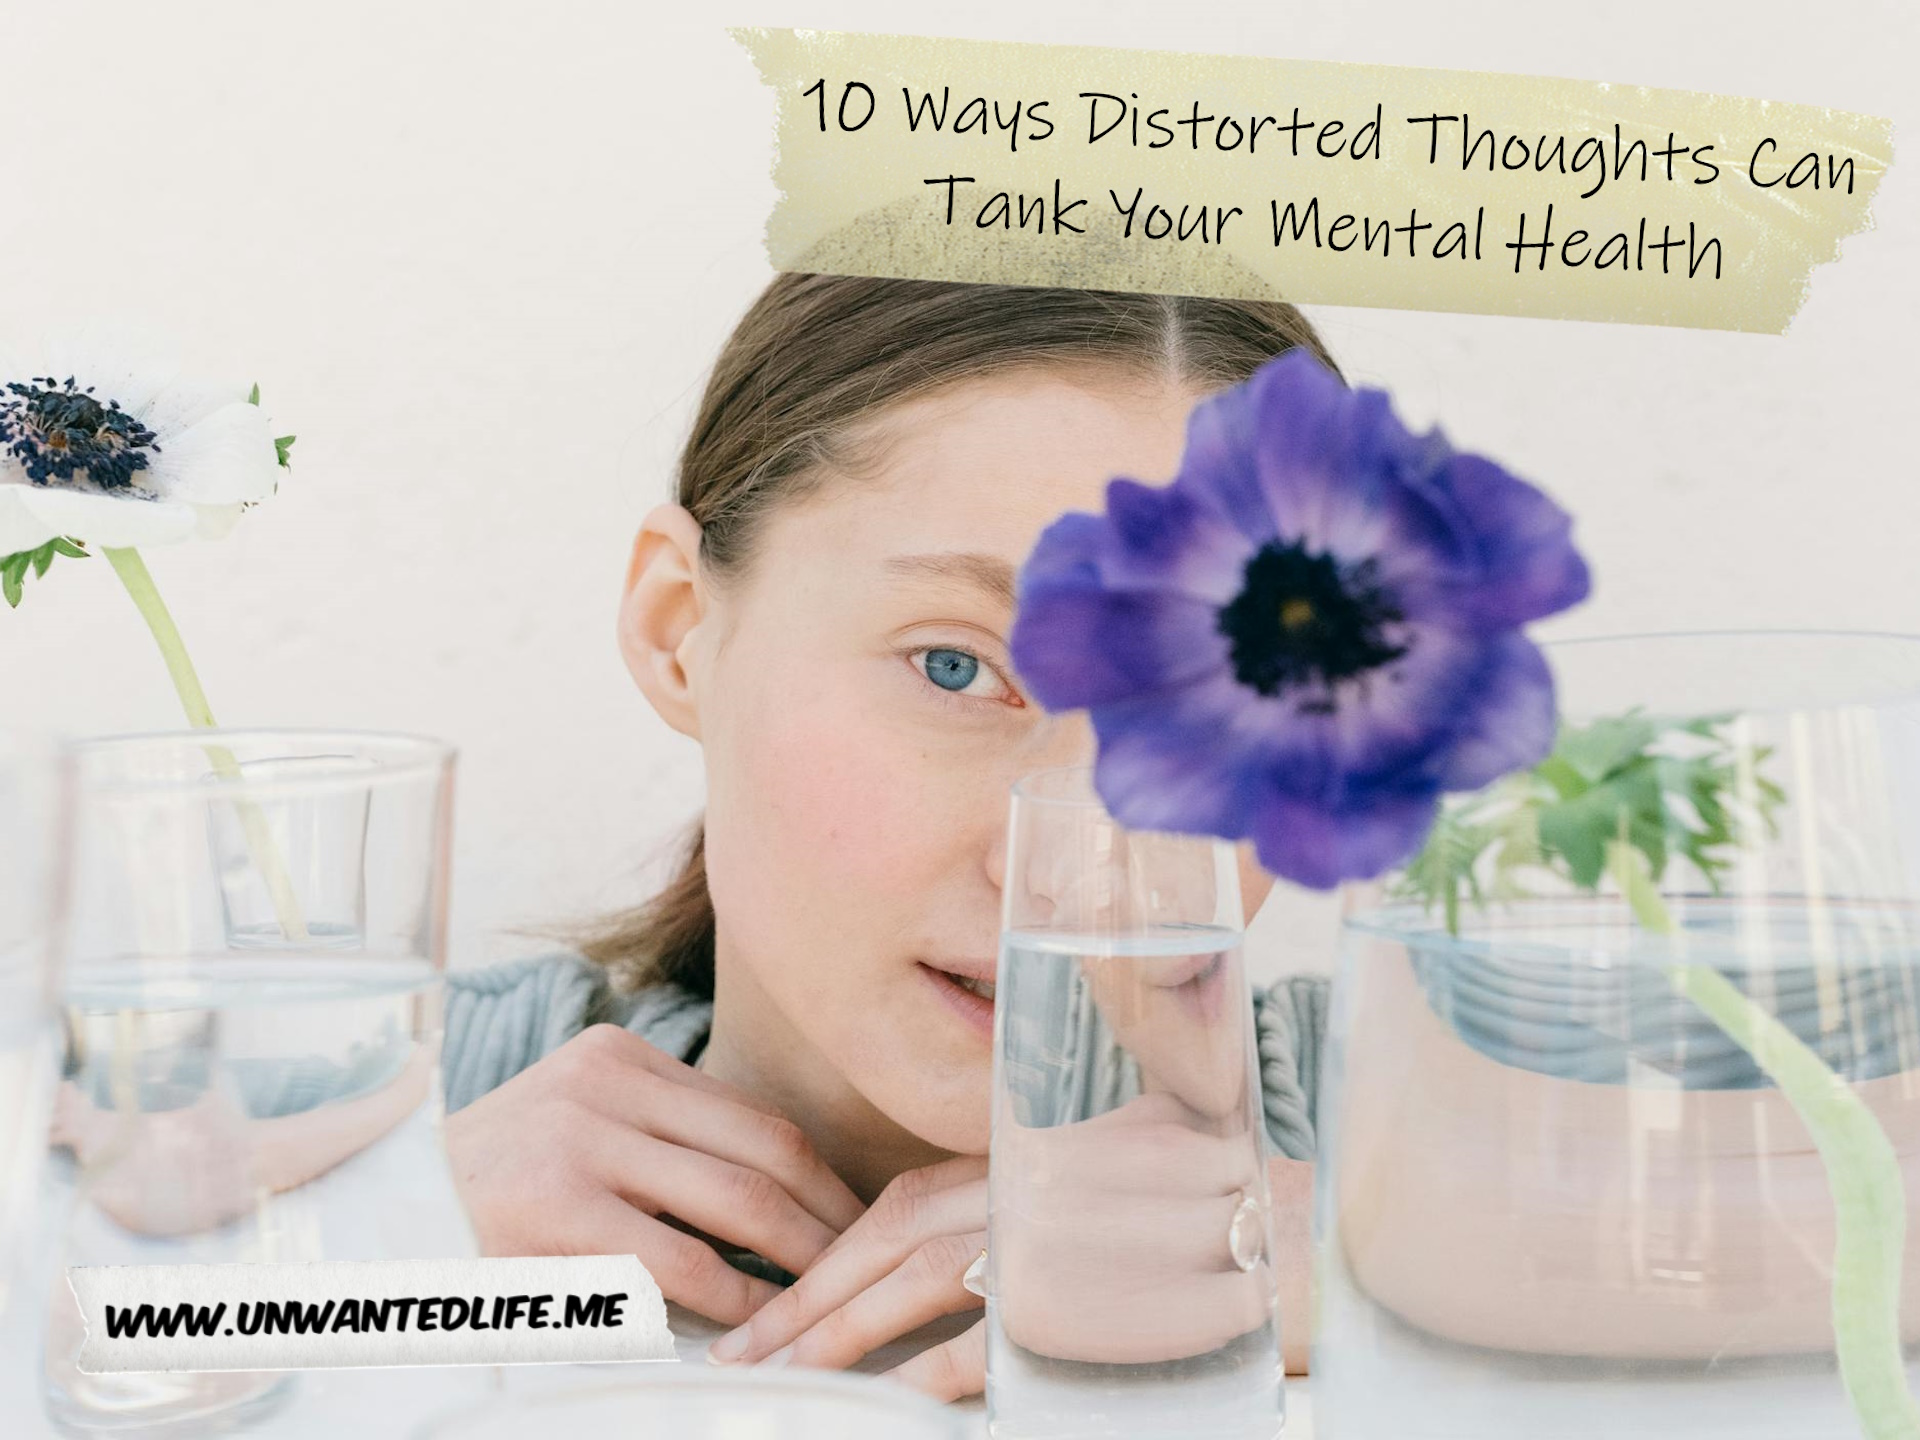 A photo of a White woman sitting behind several glasses partly filled with water that distorts how we're able to see her. This image was chosen to represent the topic of the article - 10 Ways Distorted Thoughts Can Tank Your Mental Health